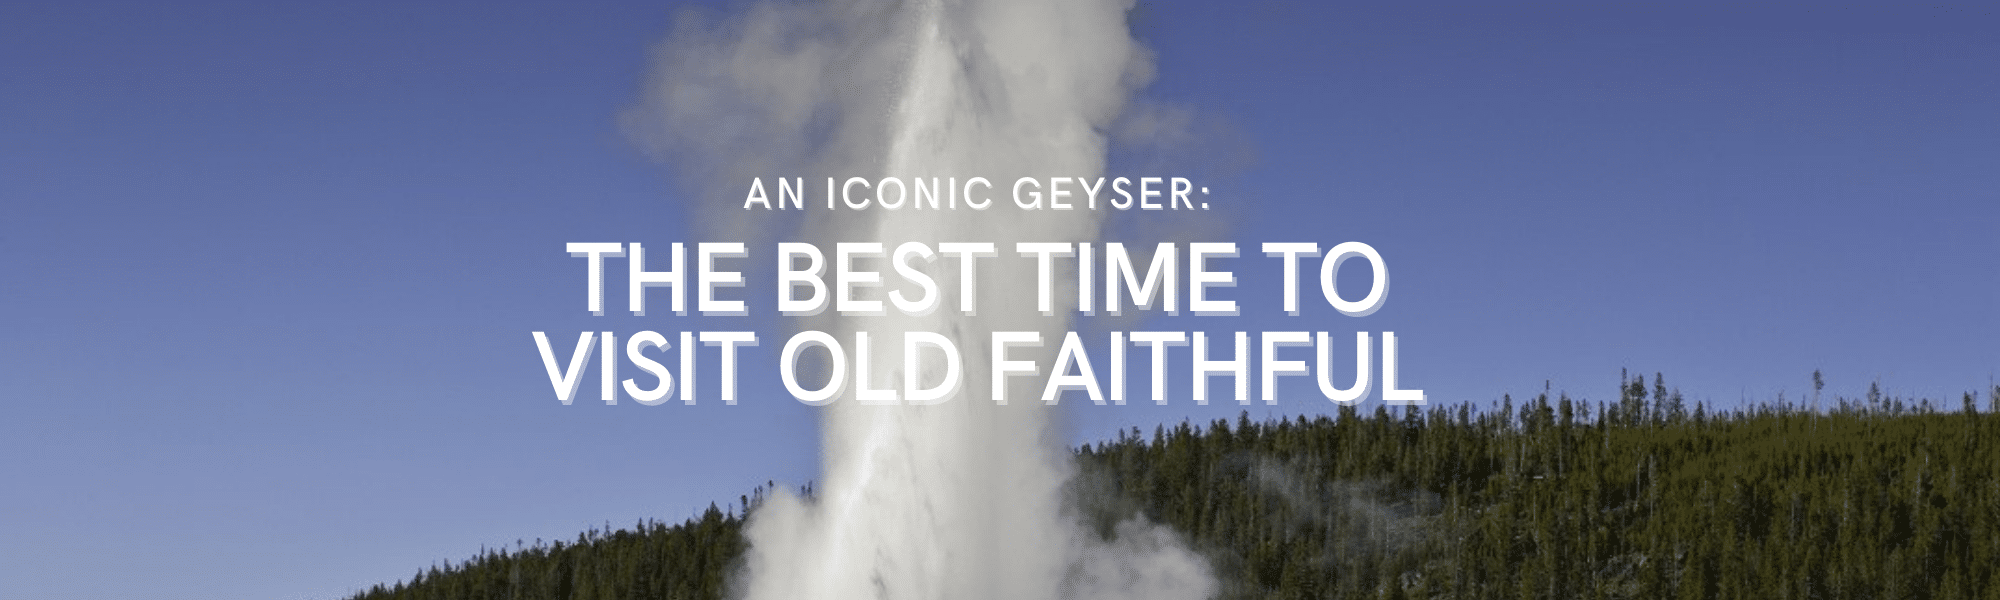 The Best Time to Visit Old Faithful